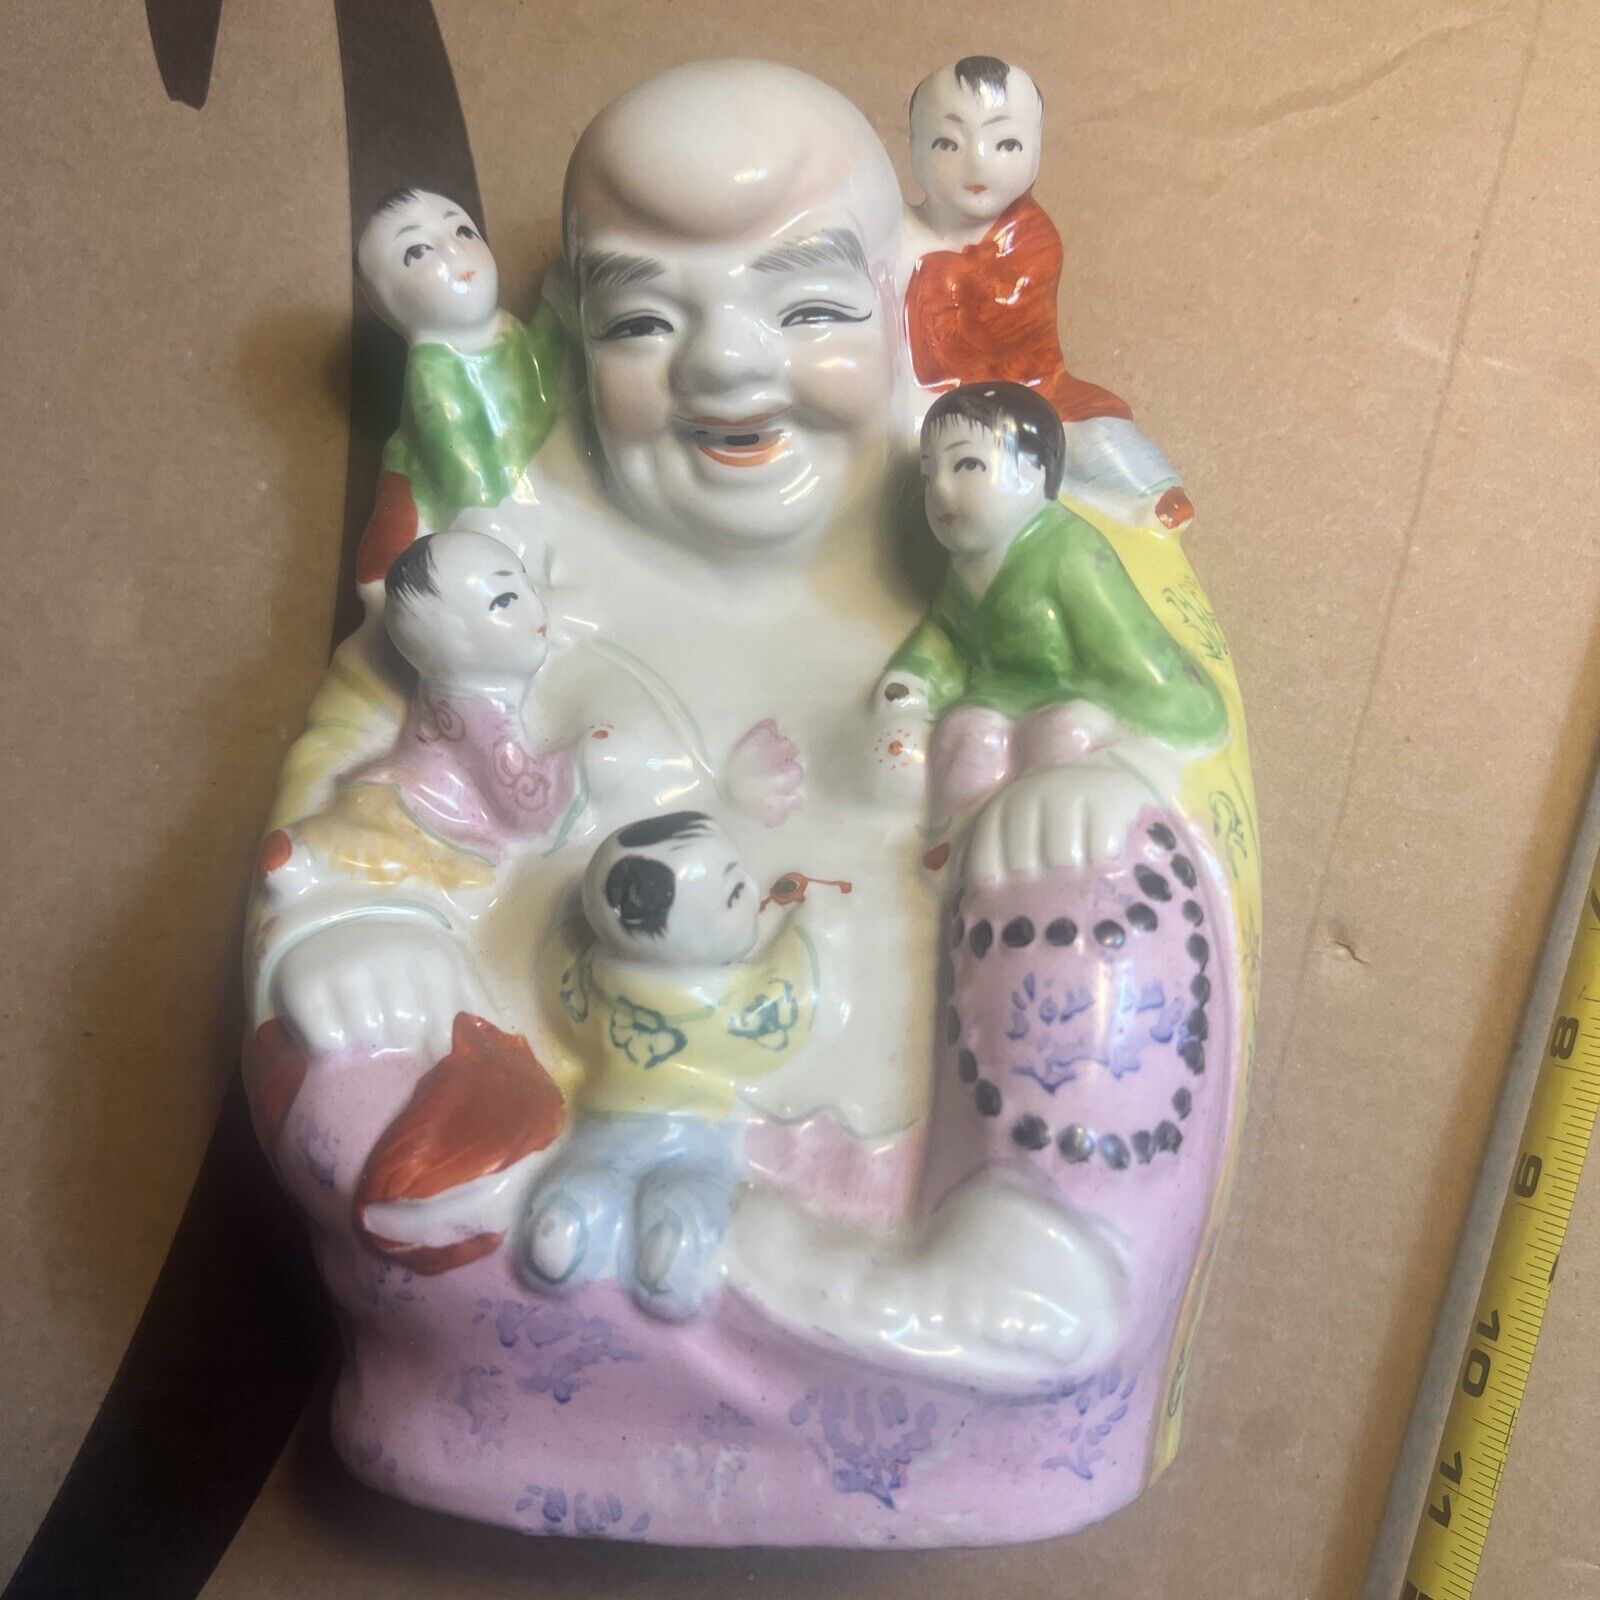 Laughing Happy Buddha 5 Children Statue Figurine 8.5in Vintage Chinese Porcelain